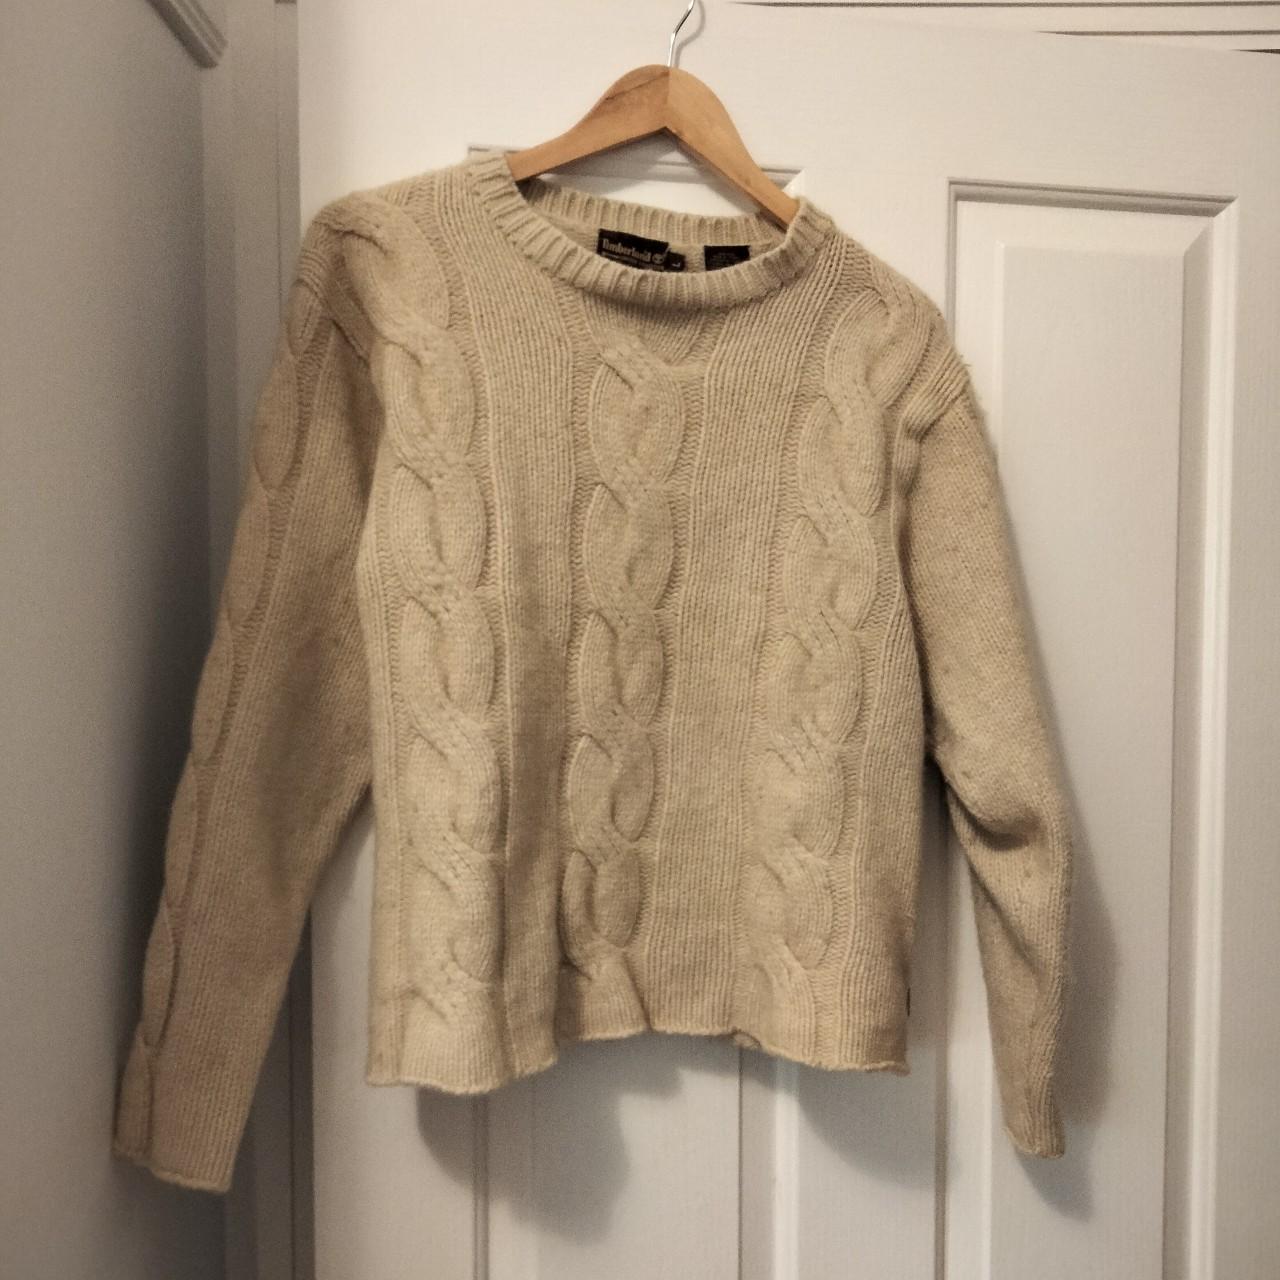 Timberland Limited Collection Women's Large knitwear... - Depop